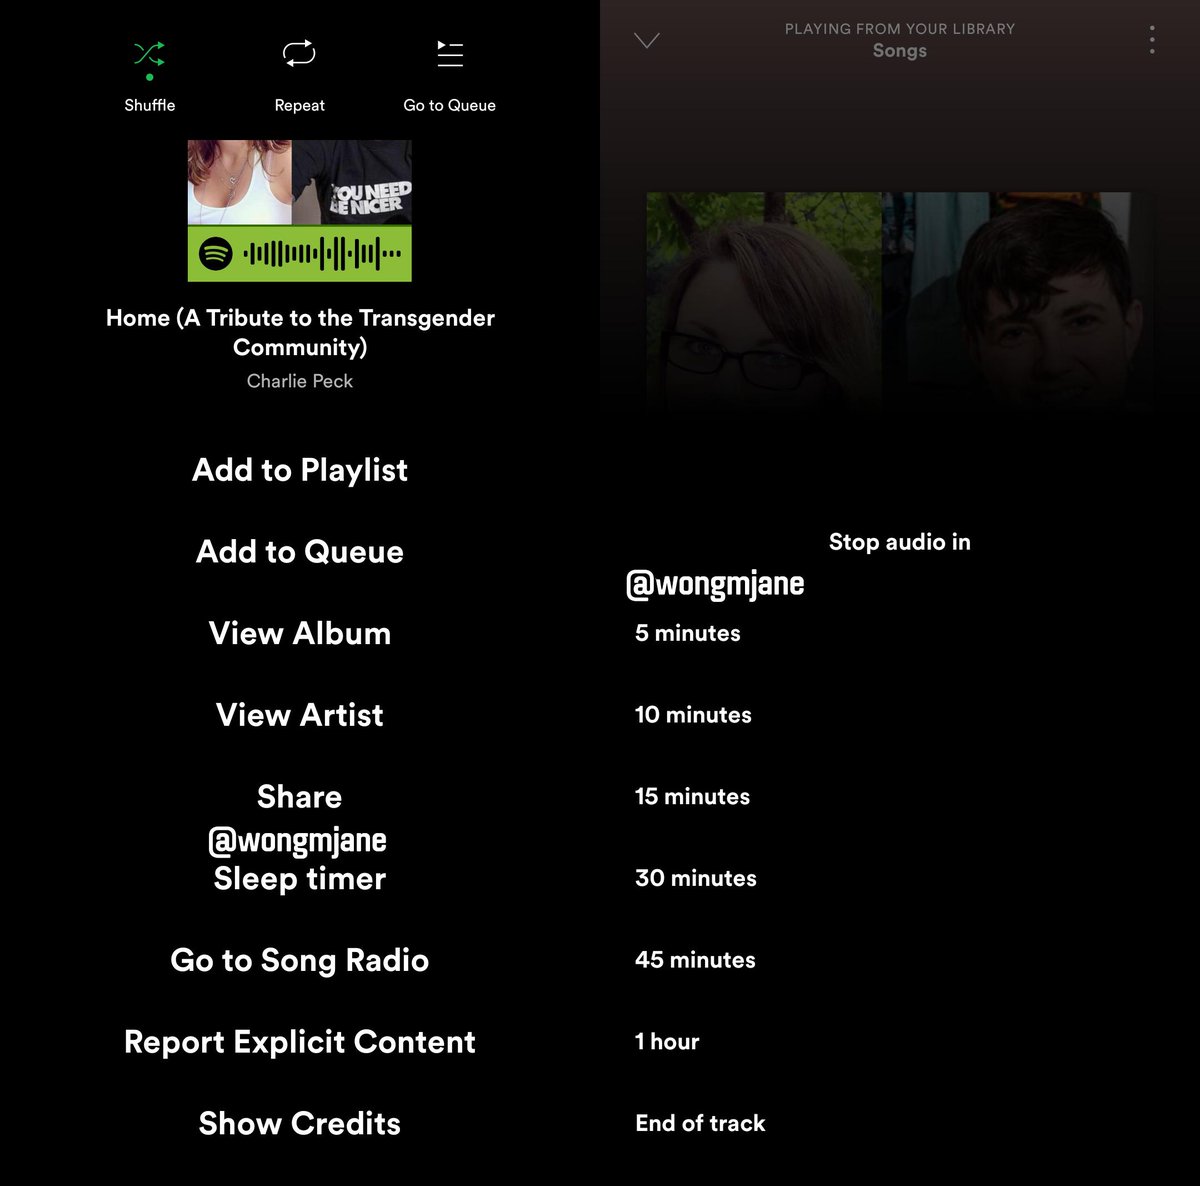 tinhte_spotify_new_features (2).jpg